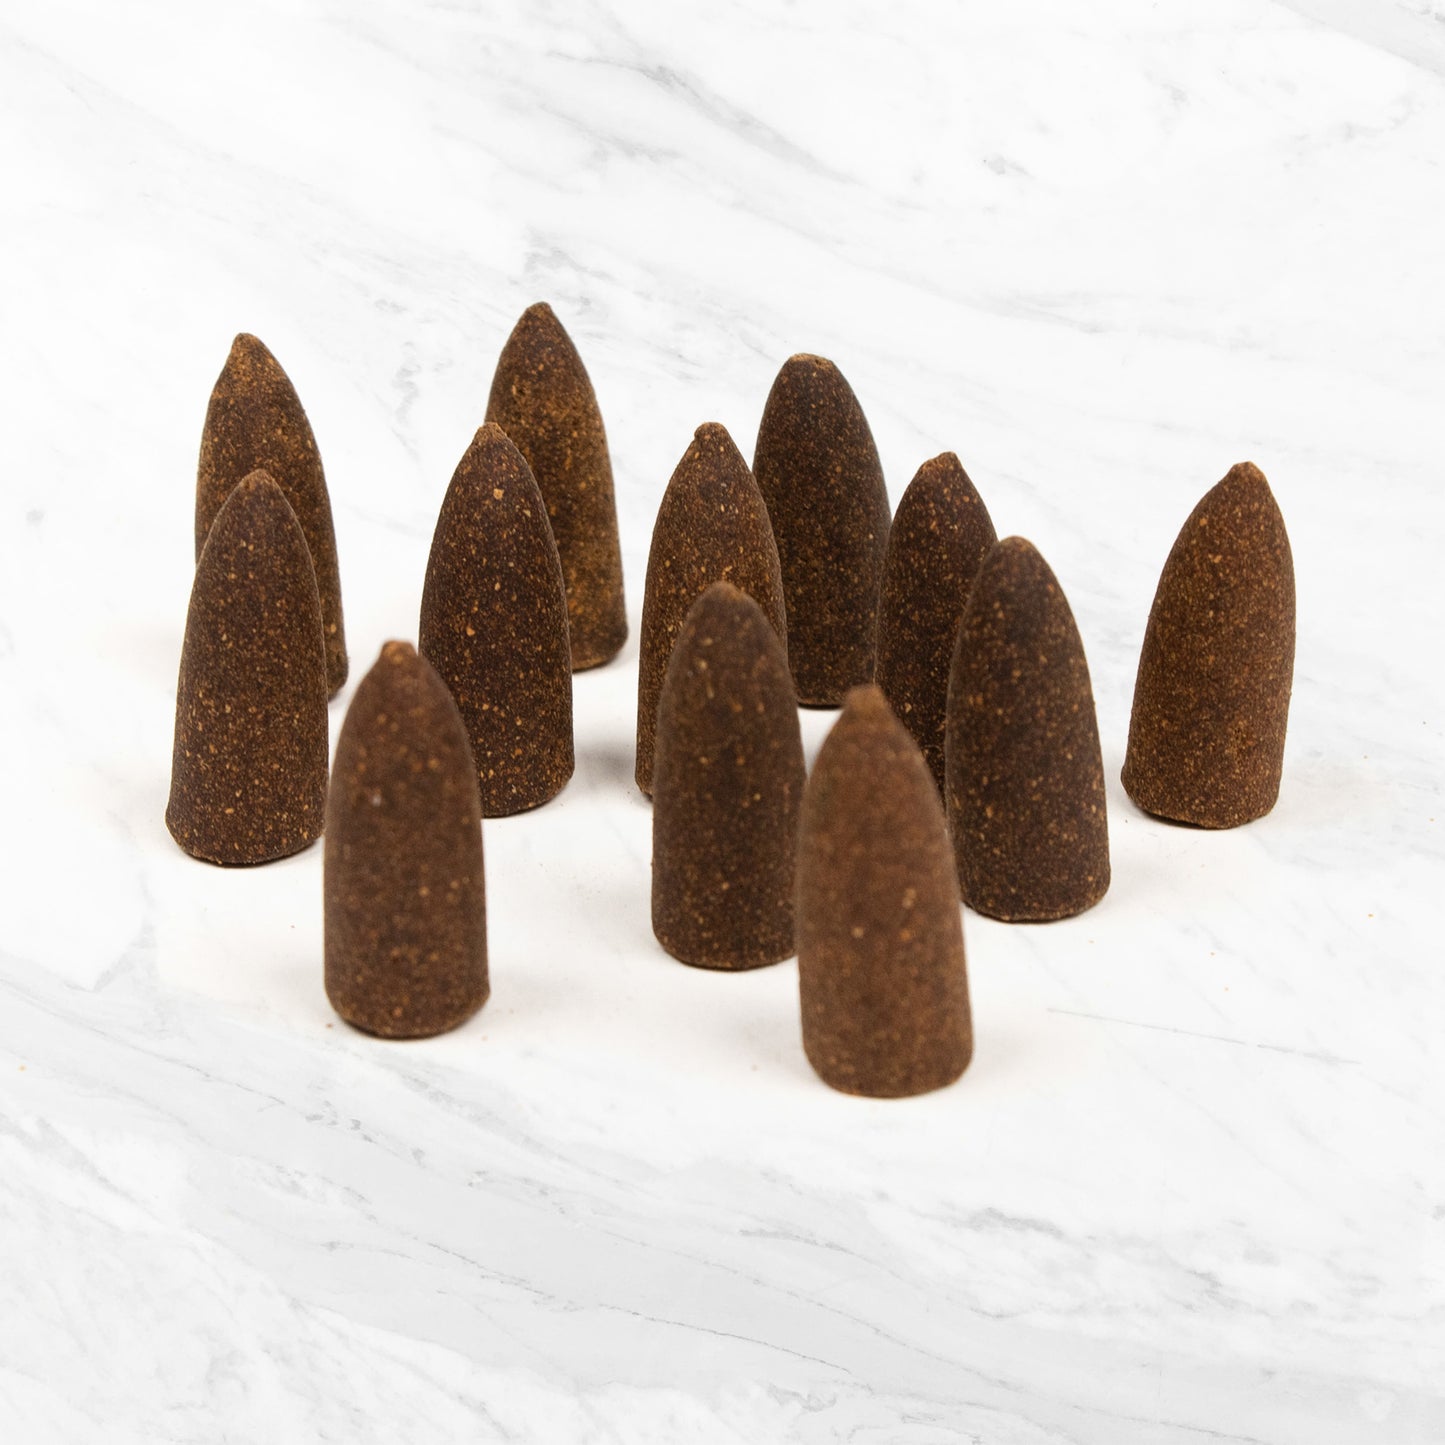 Backflow Incense Cones - Frankincense Anxiety Away